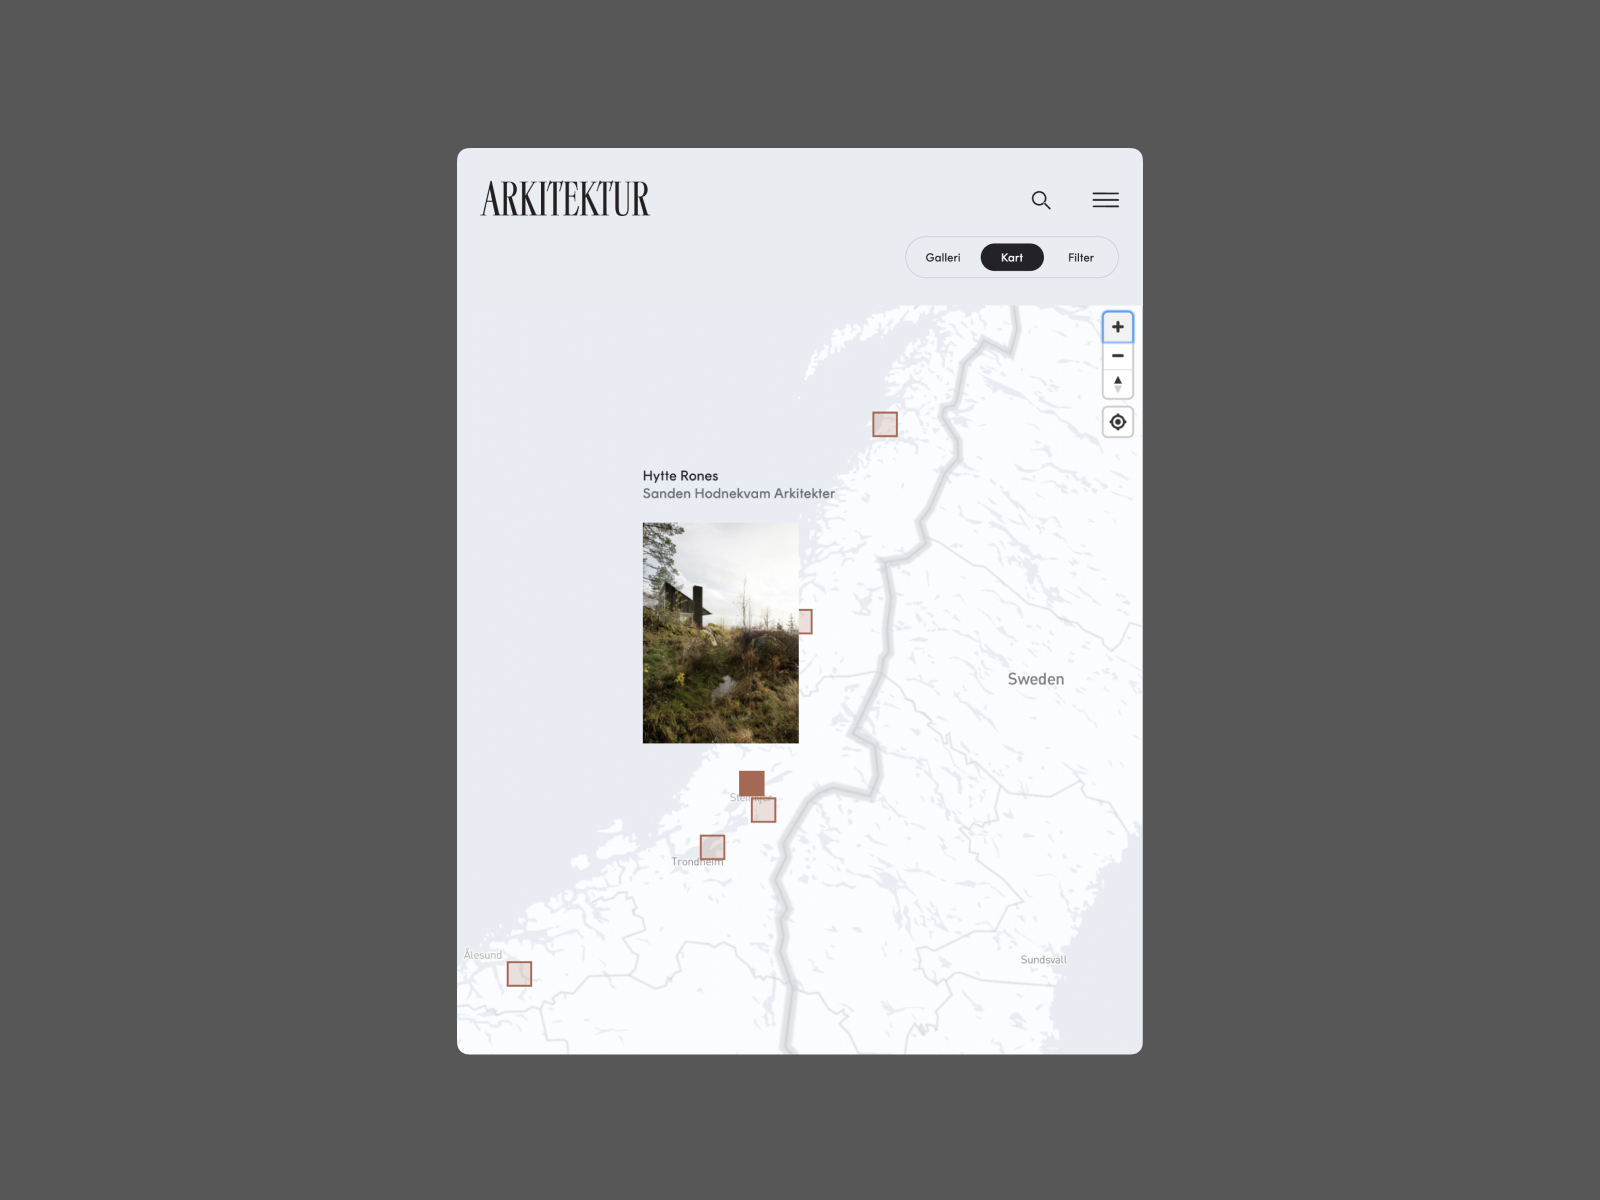 Map with location and project thumbnails